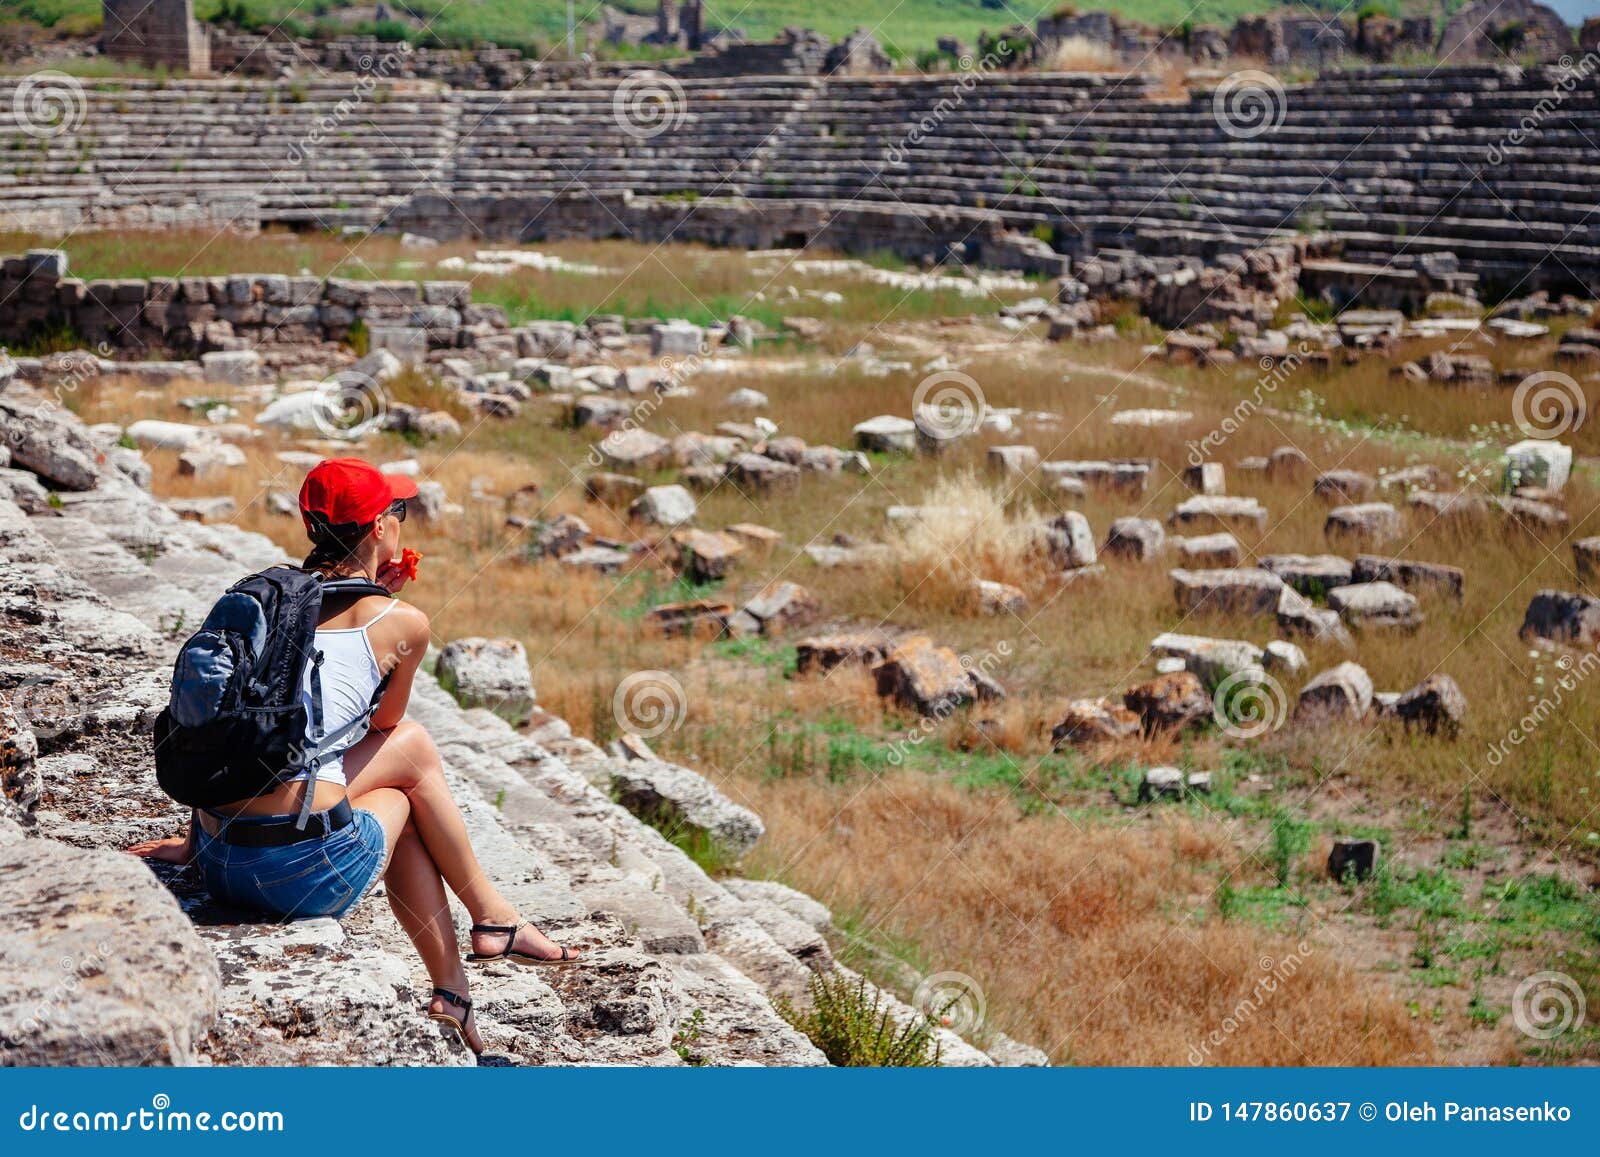 pretty tourist woman with backpack at the ruins of ancient city of perge near antalya turkey